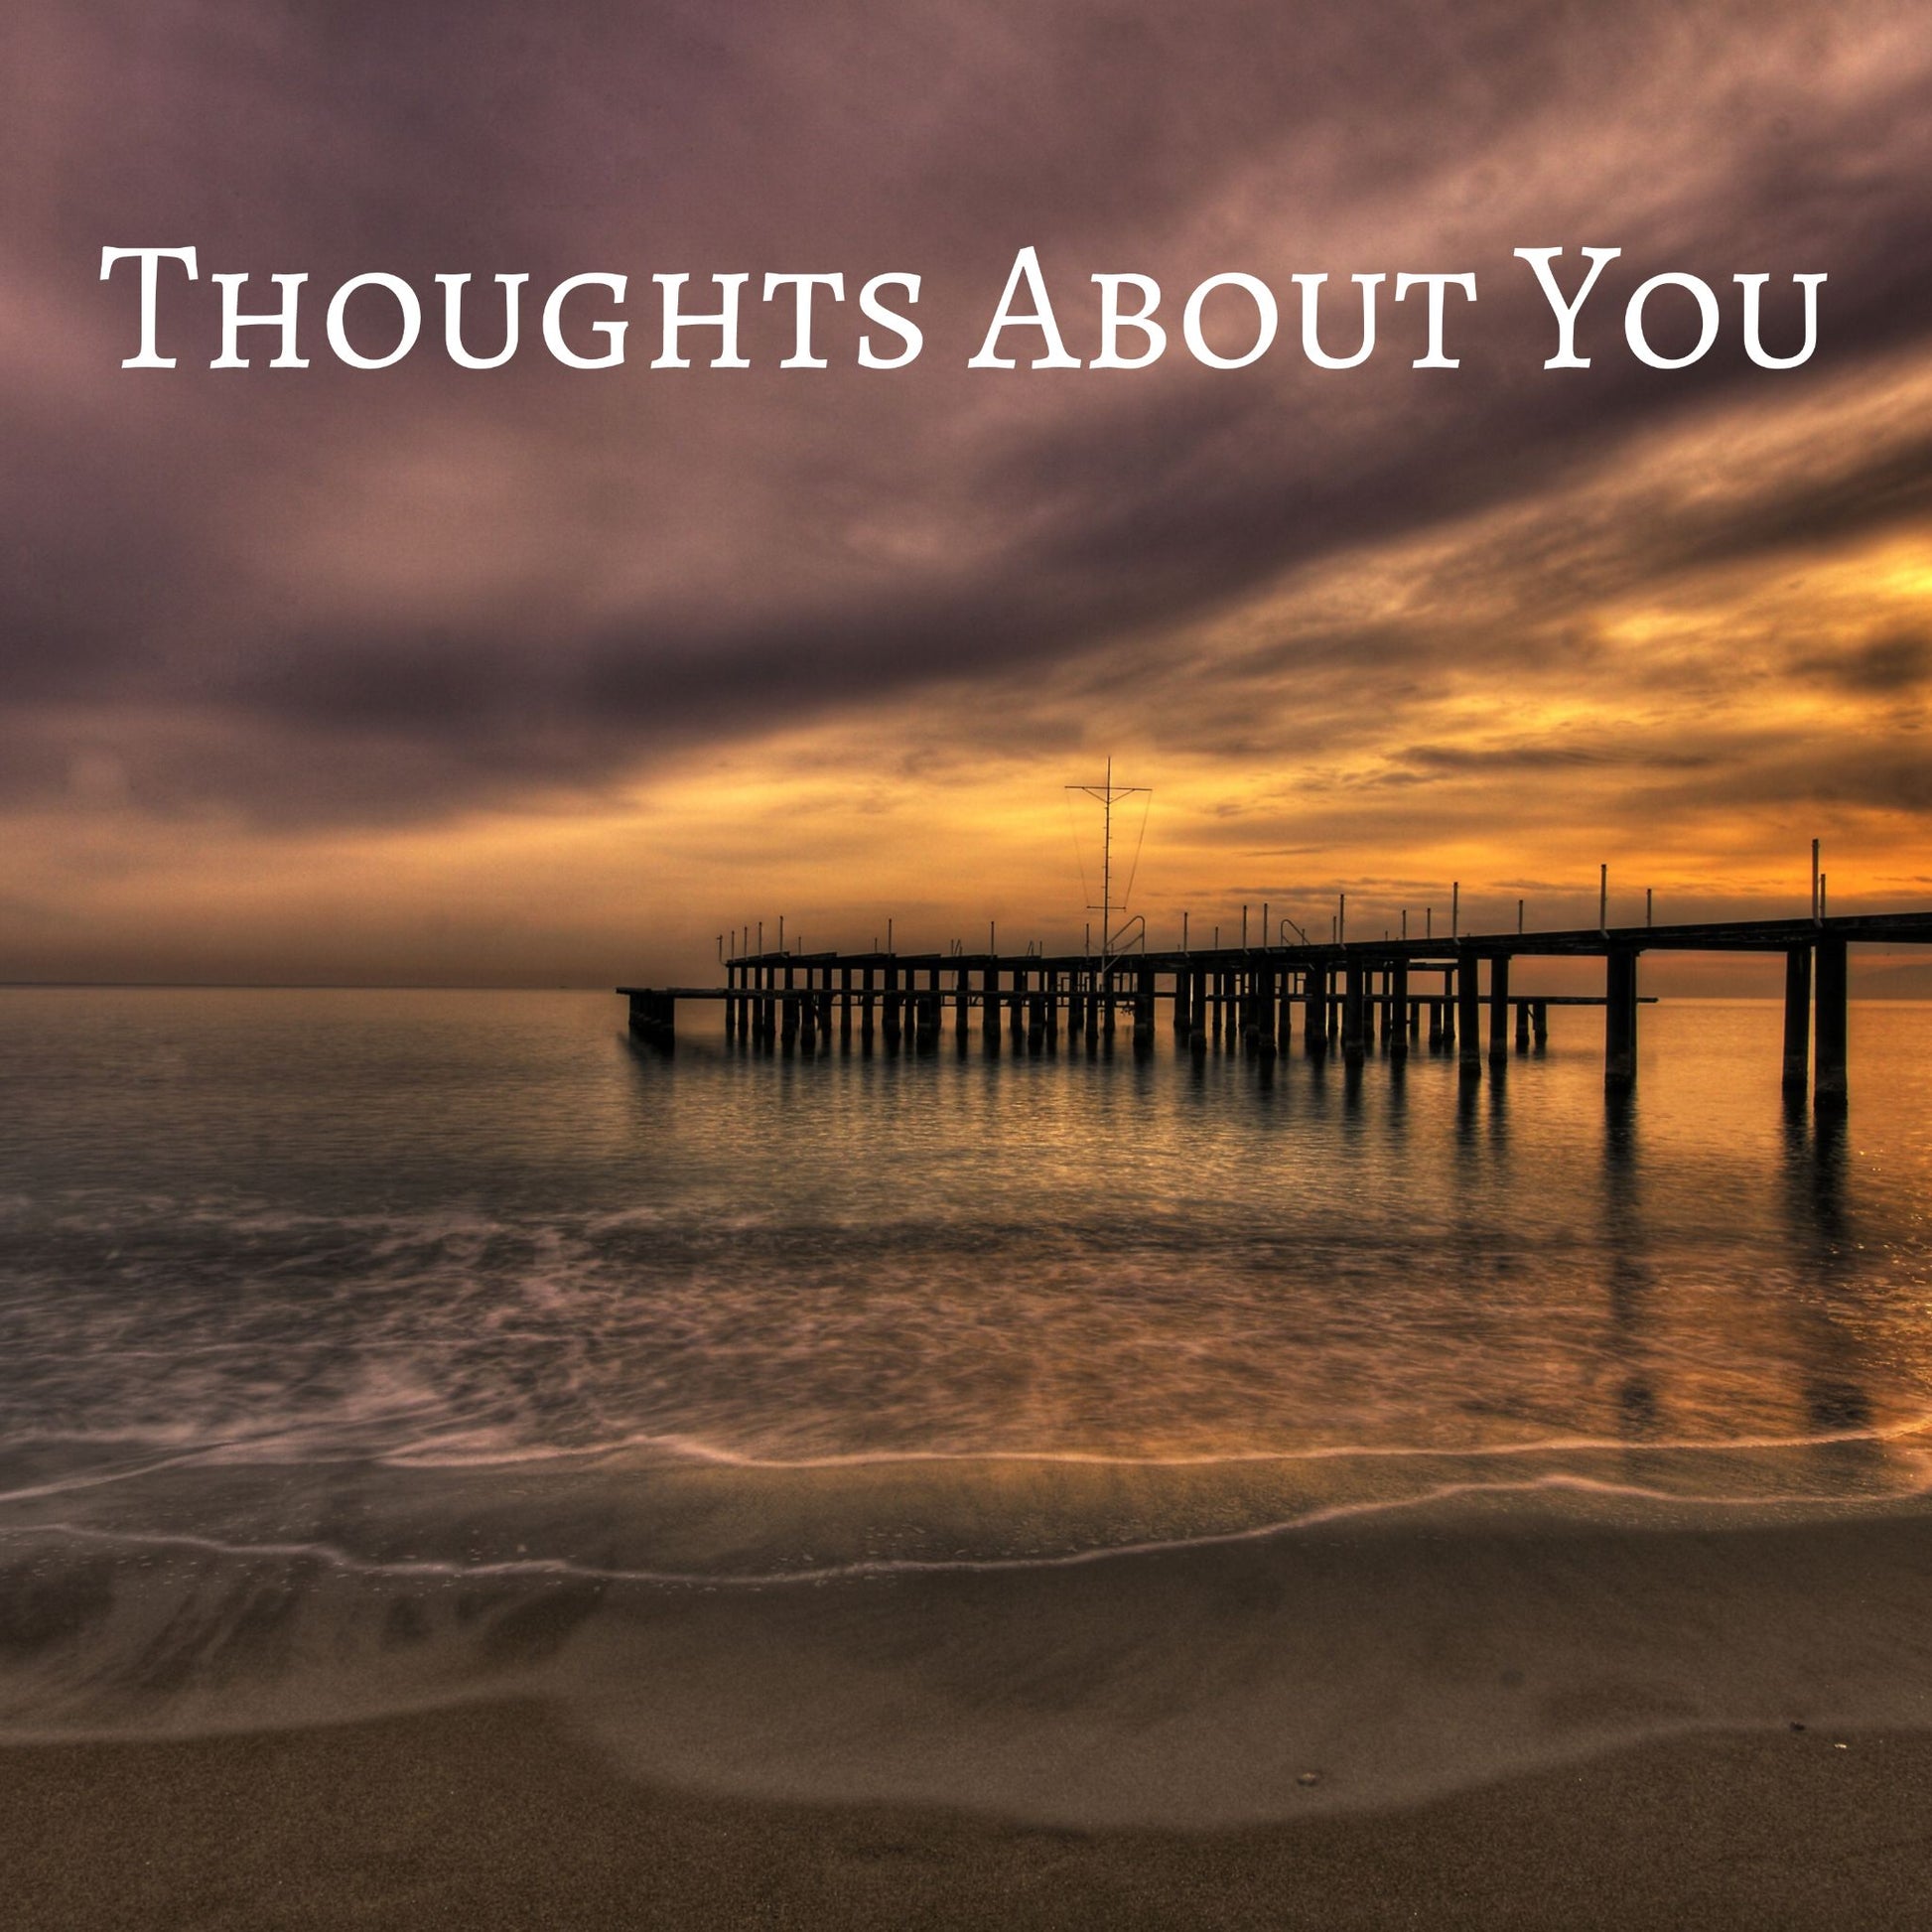 CD Cover of song Thoughts About You